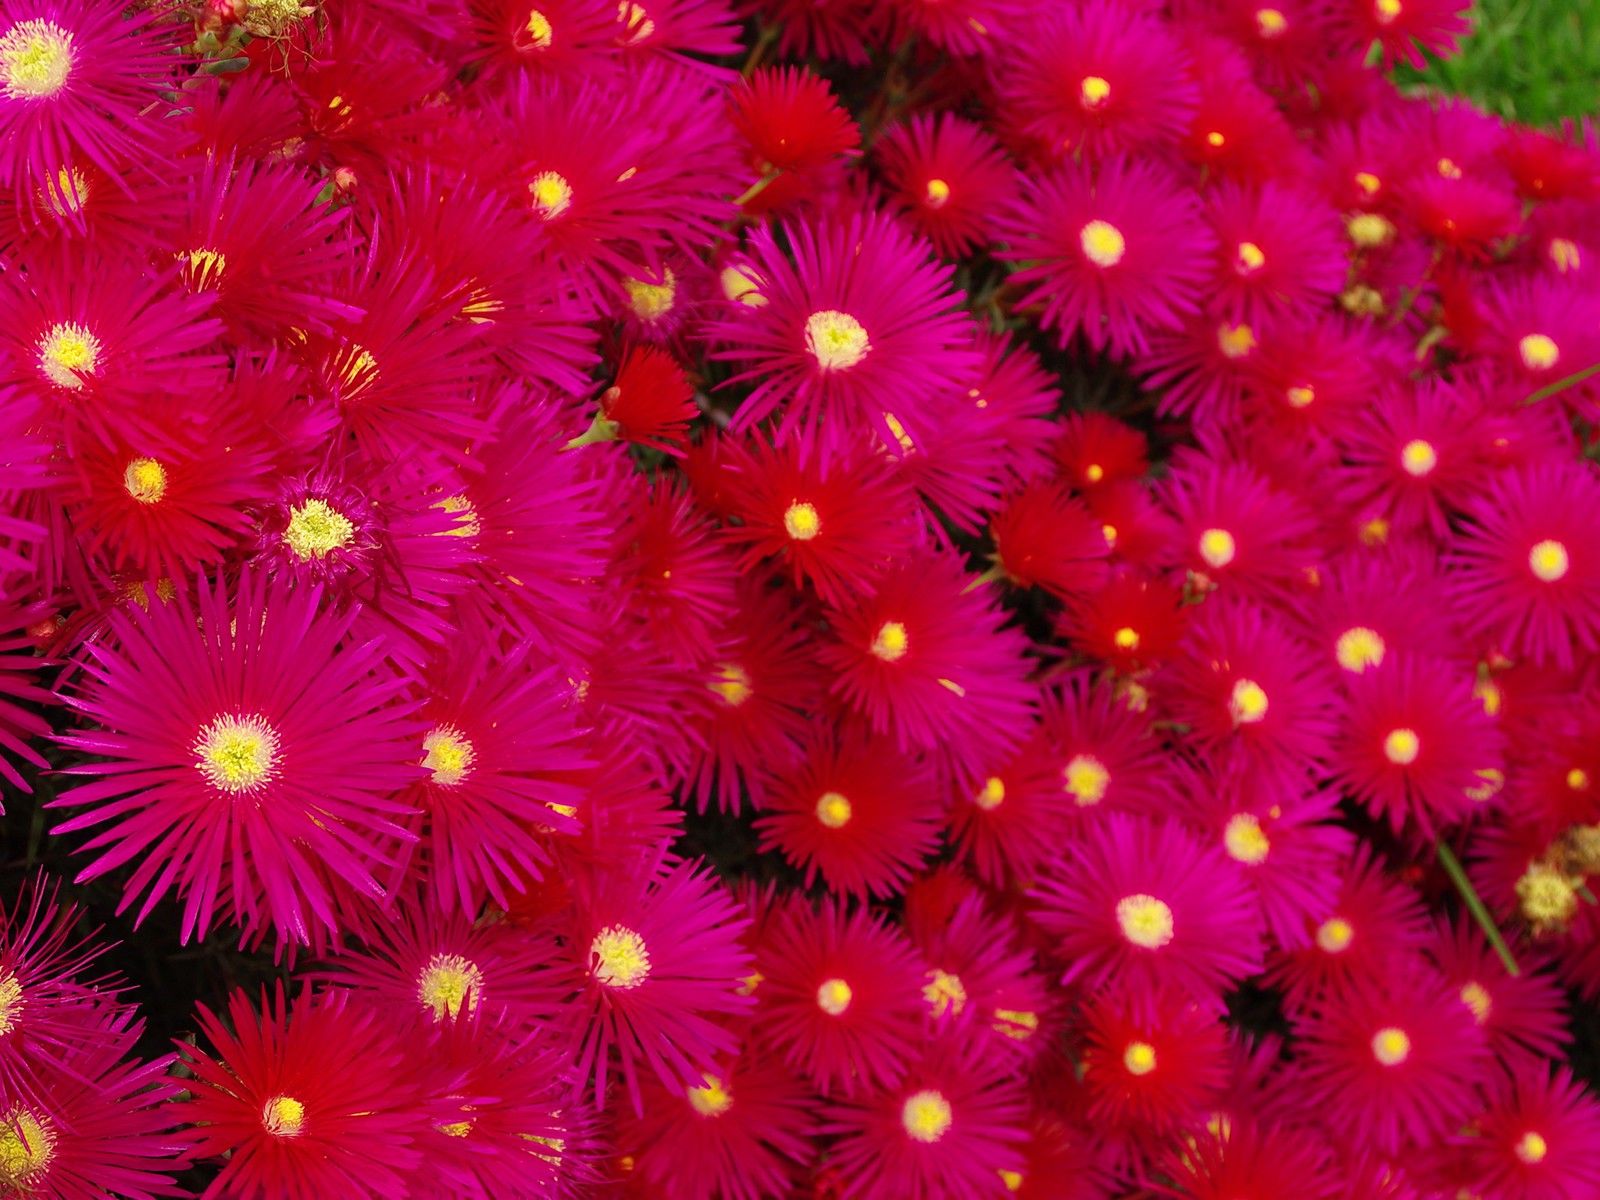 Bright Pink Flowers Pictures wallpaper | 1600x1200 | #22665